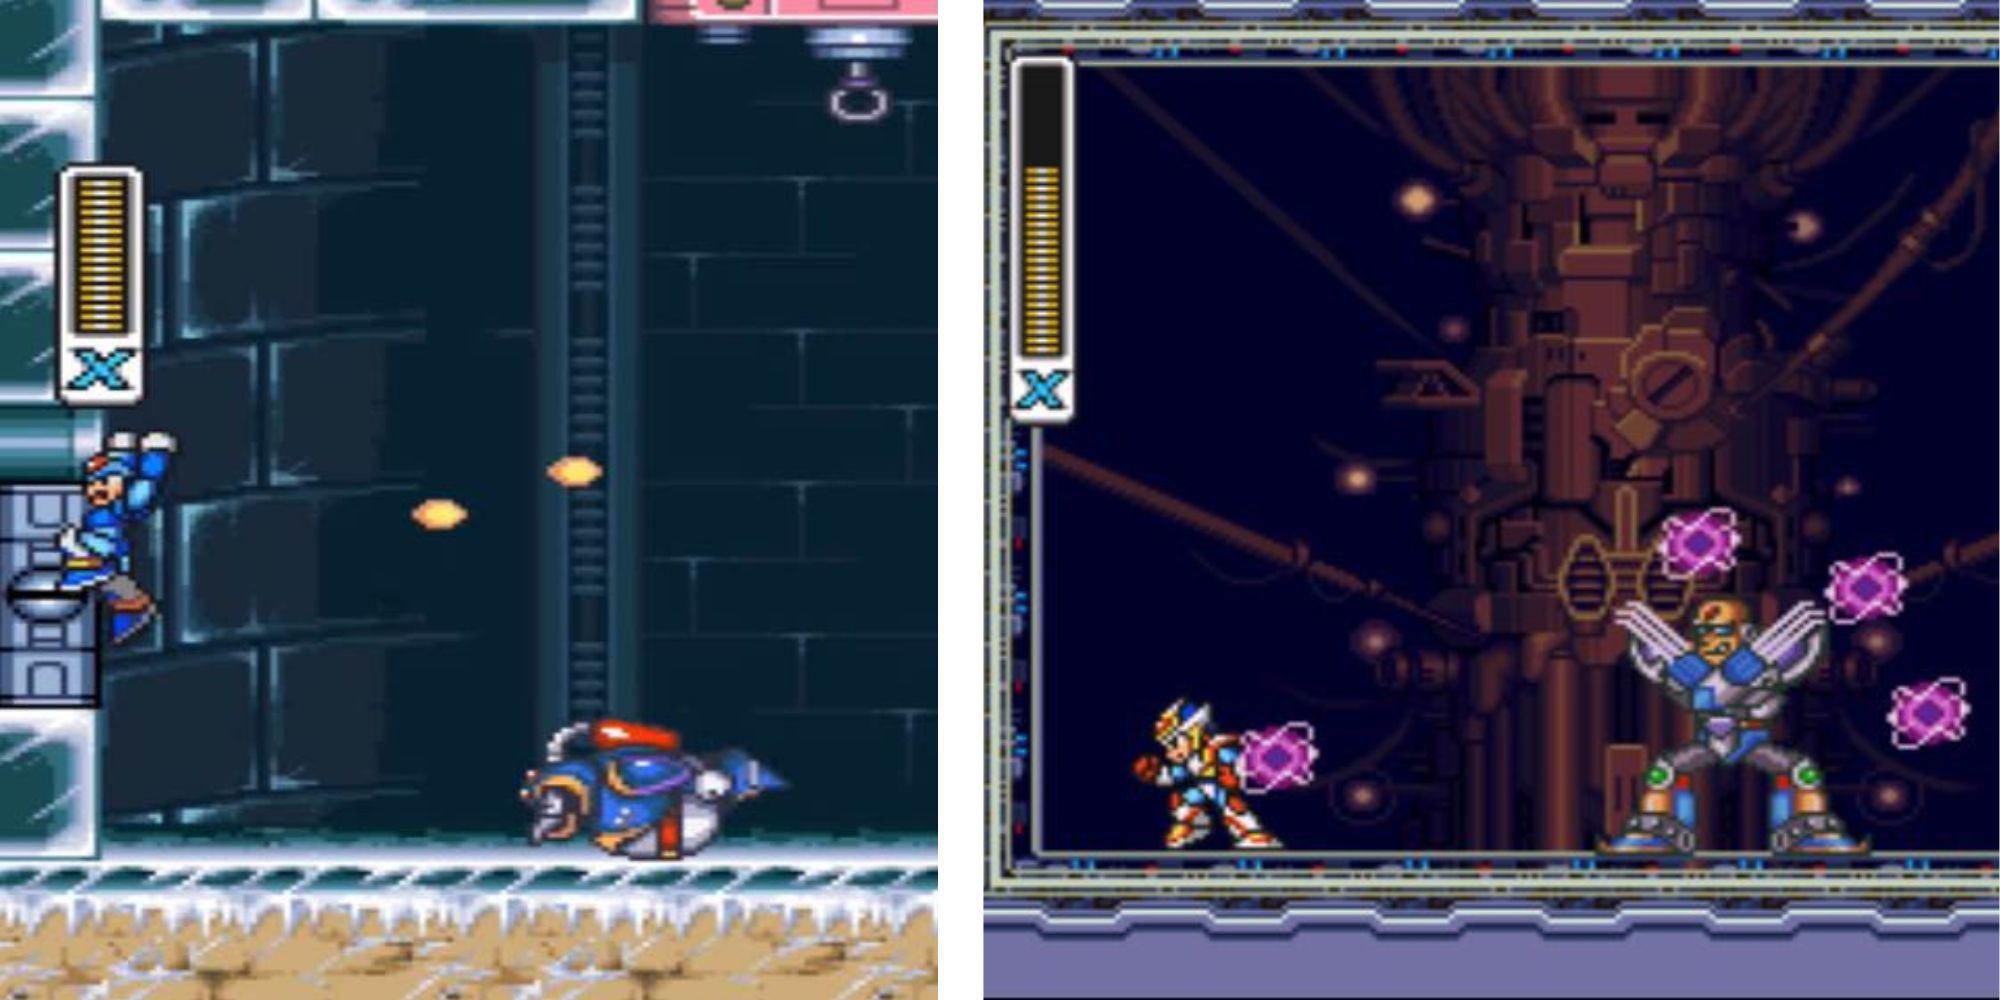 Split Image of Boss Fights from the Mega Man X series